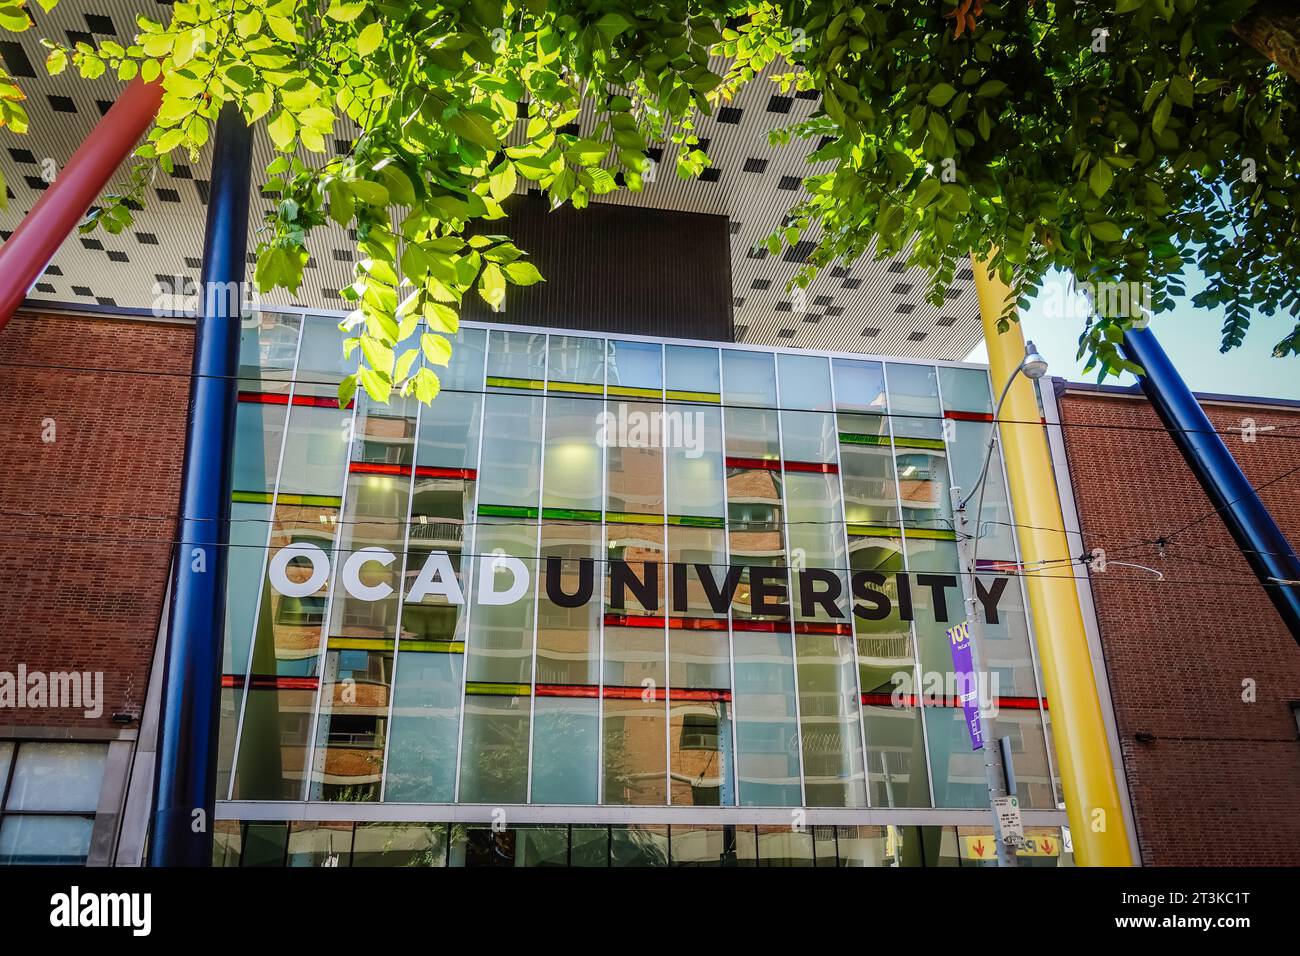 Ontario College of Art & Design University, commonly known as OCAD University or OCAD, is a public art university located in Toronto, Ontario, Canada Stock Photo